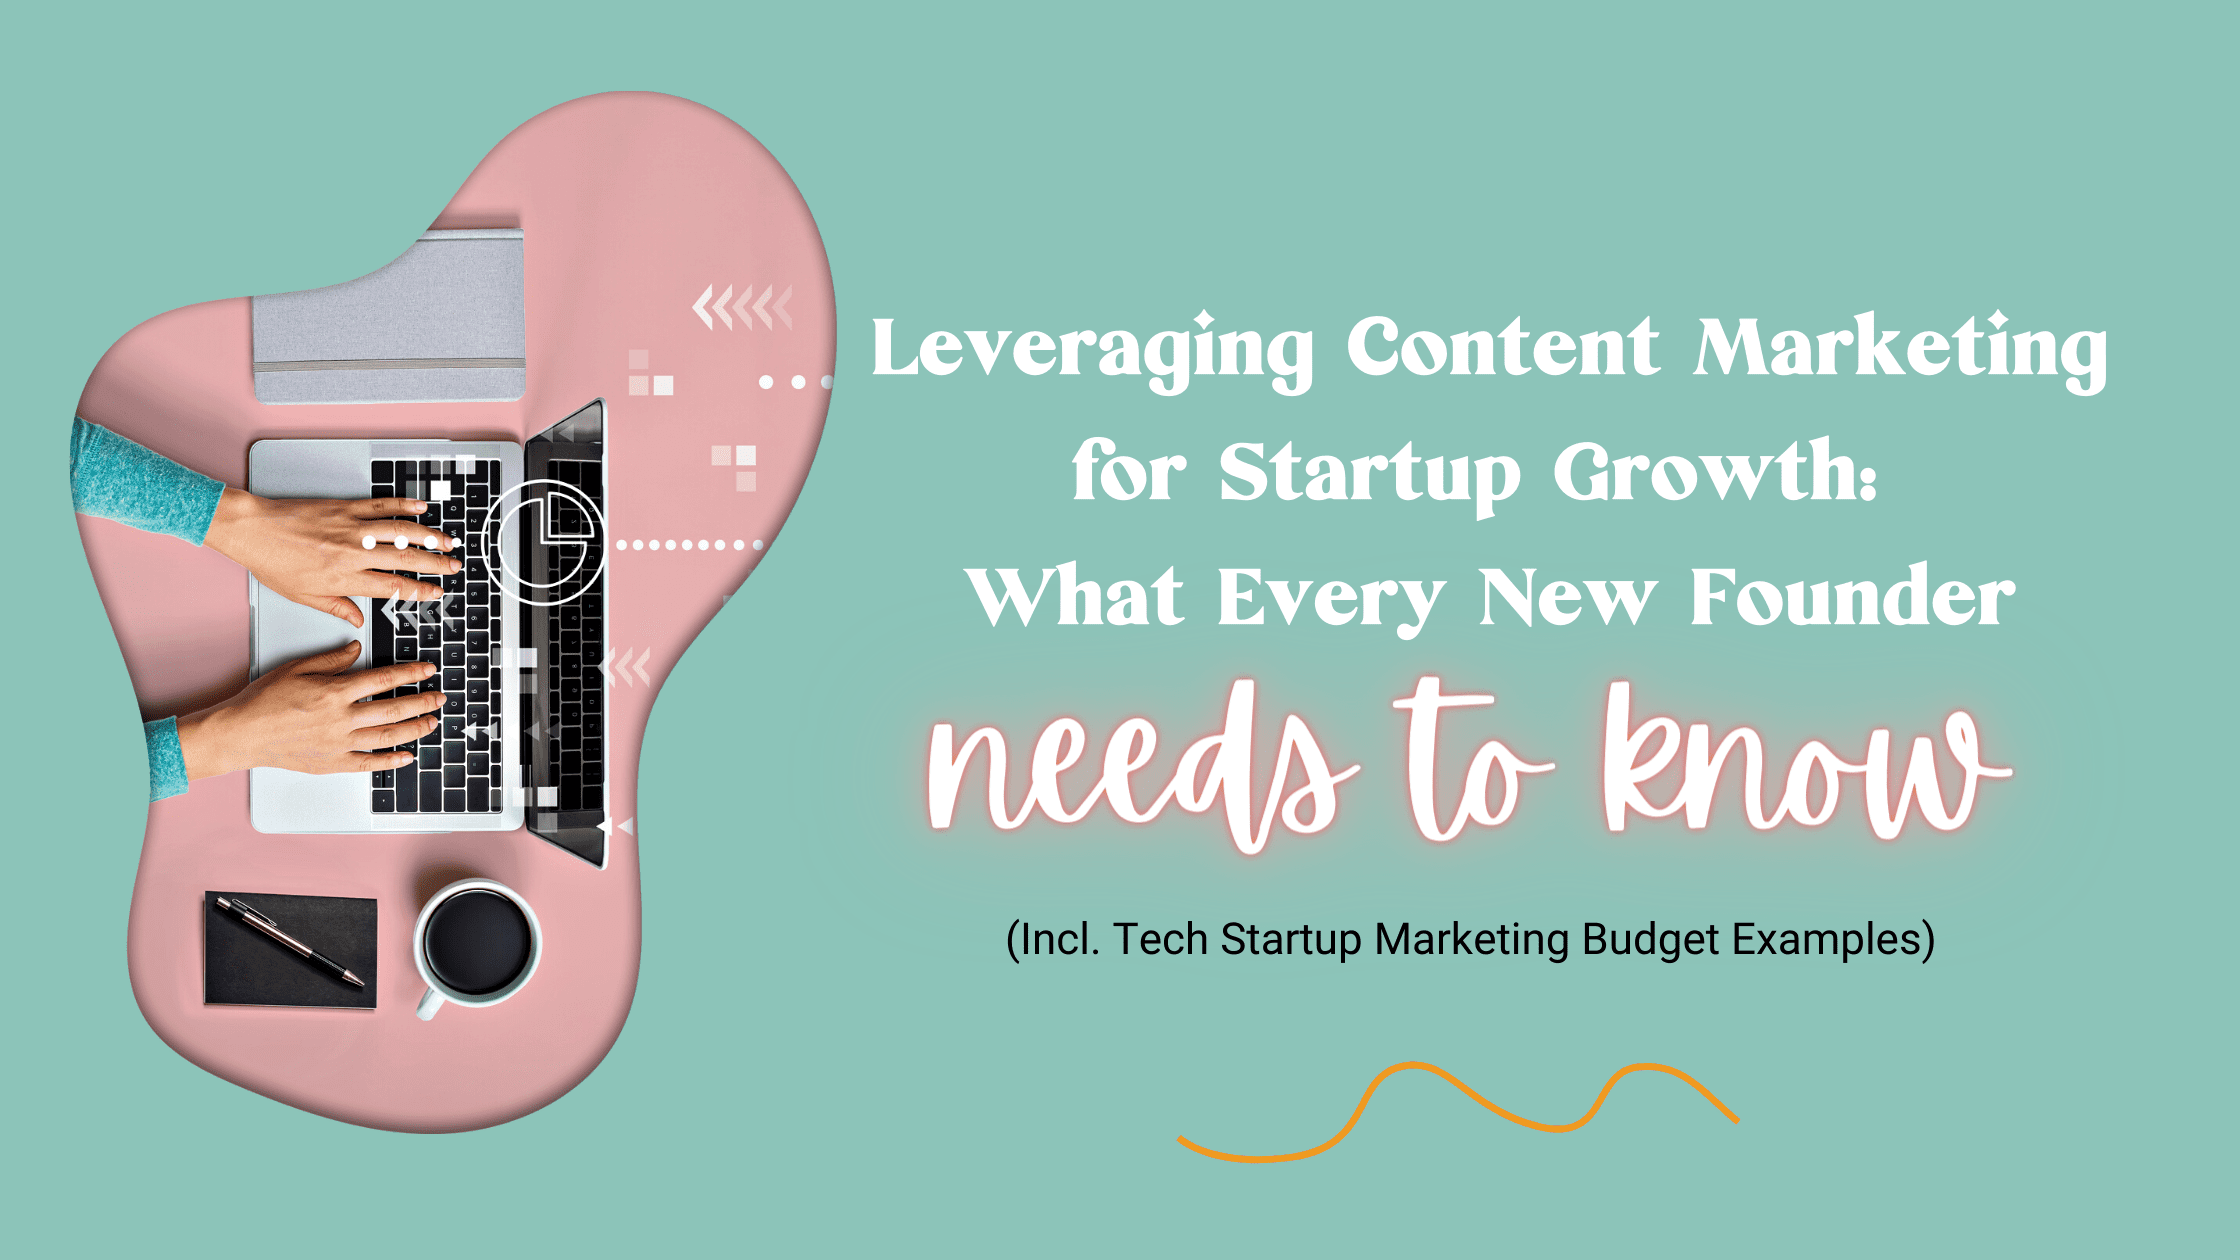 Content Marketing For Startup Growth A Necessity Not An Option